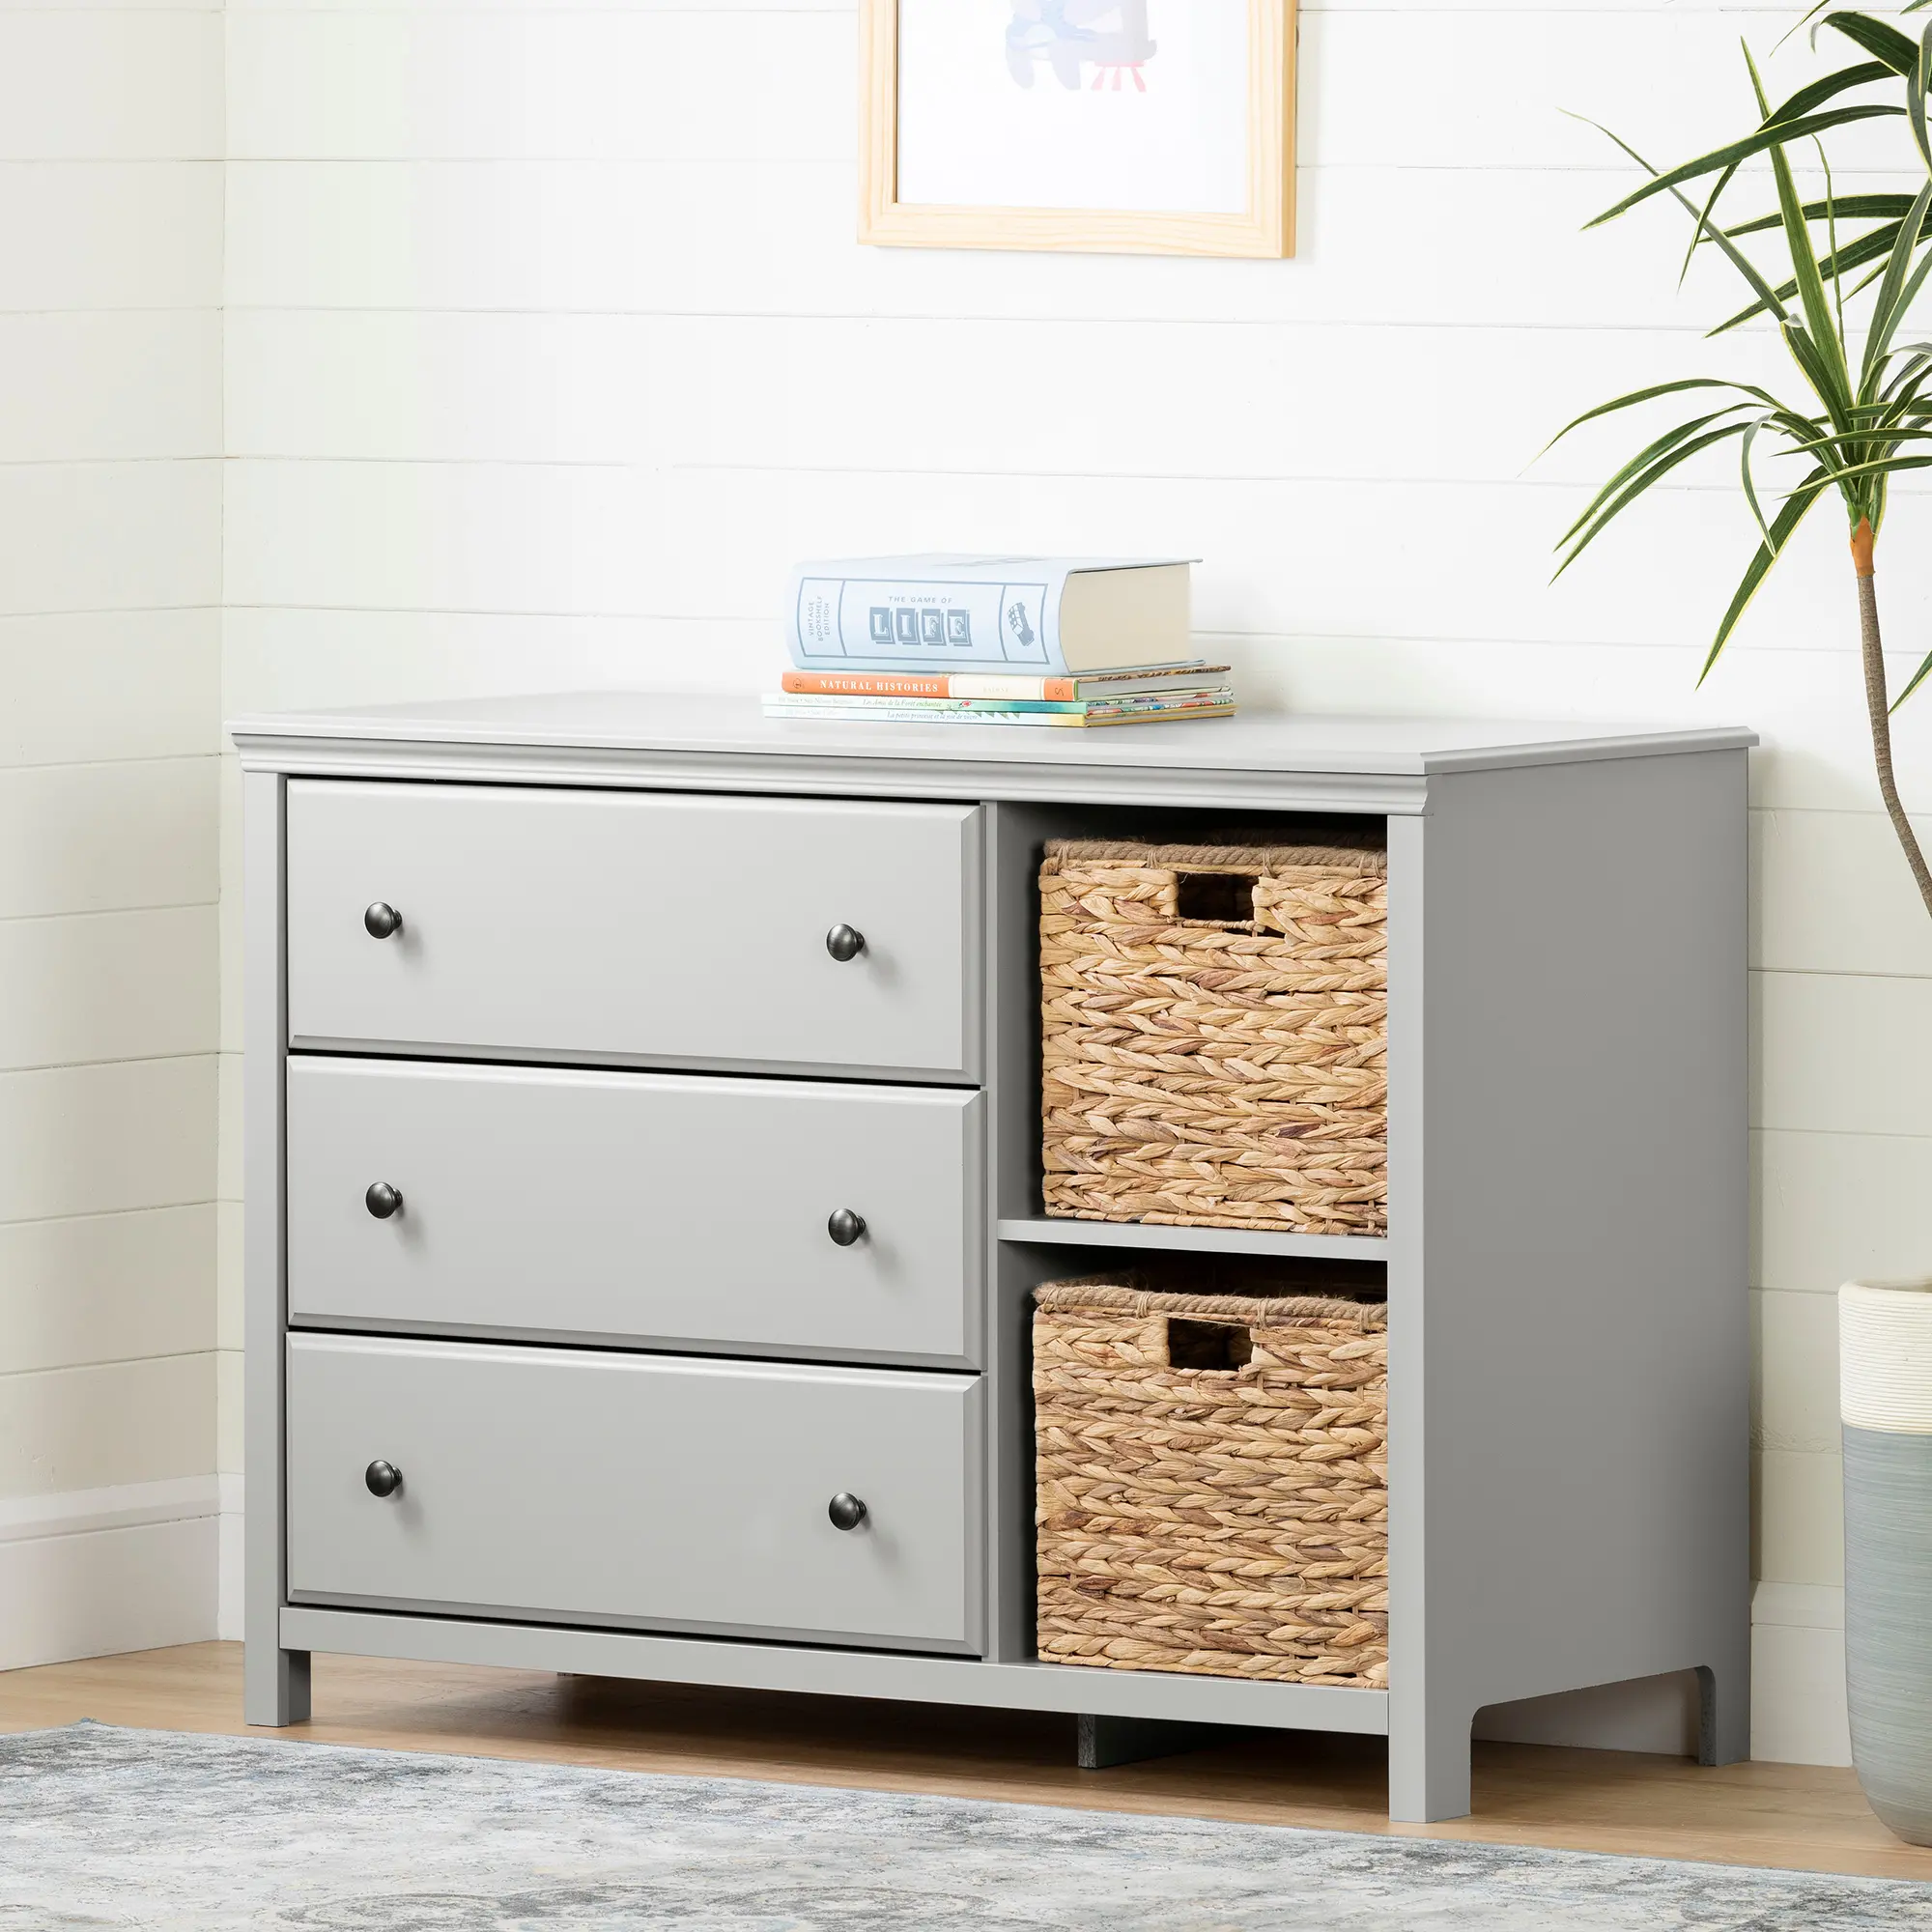 Cotton Candy Gray 3 Drawer Dresser with Baskets - South Shore